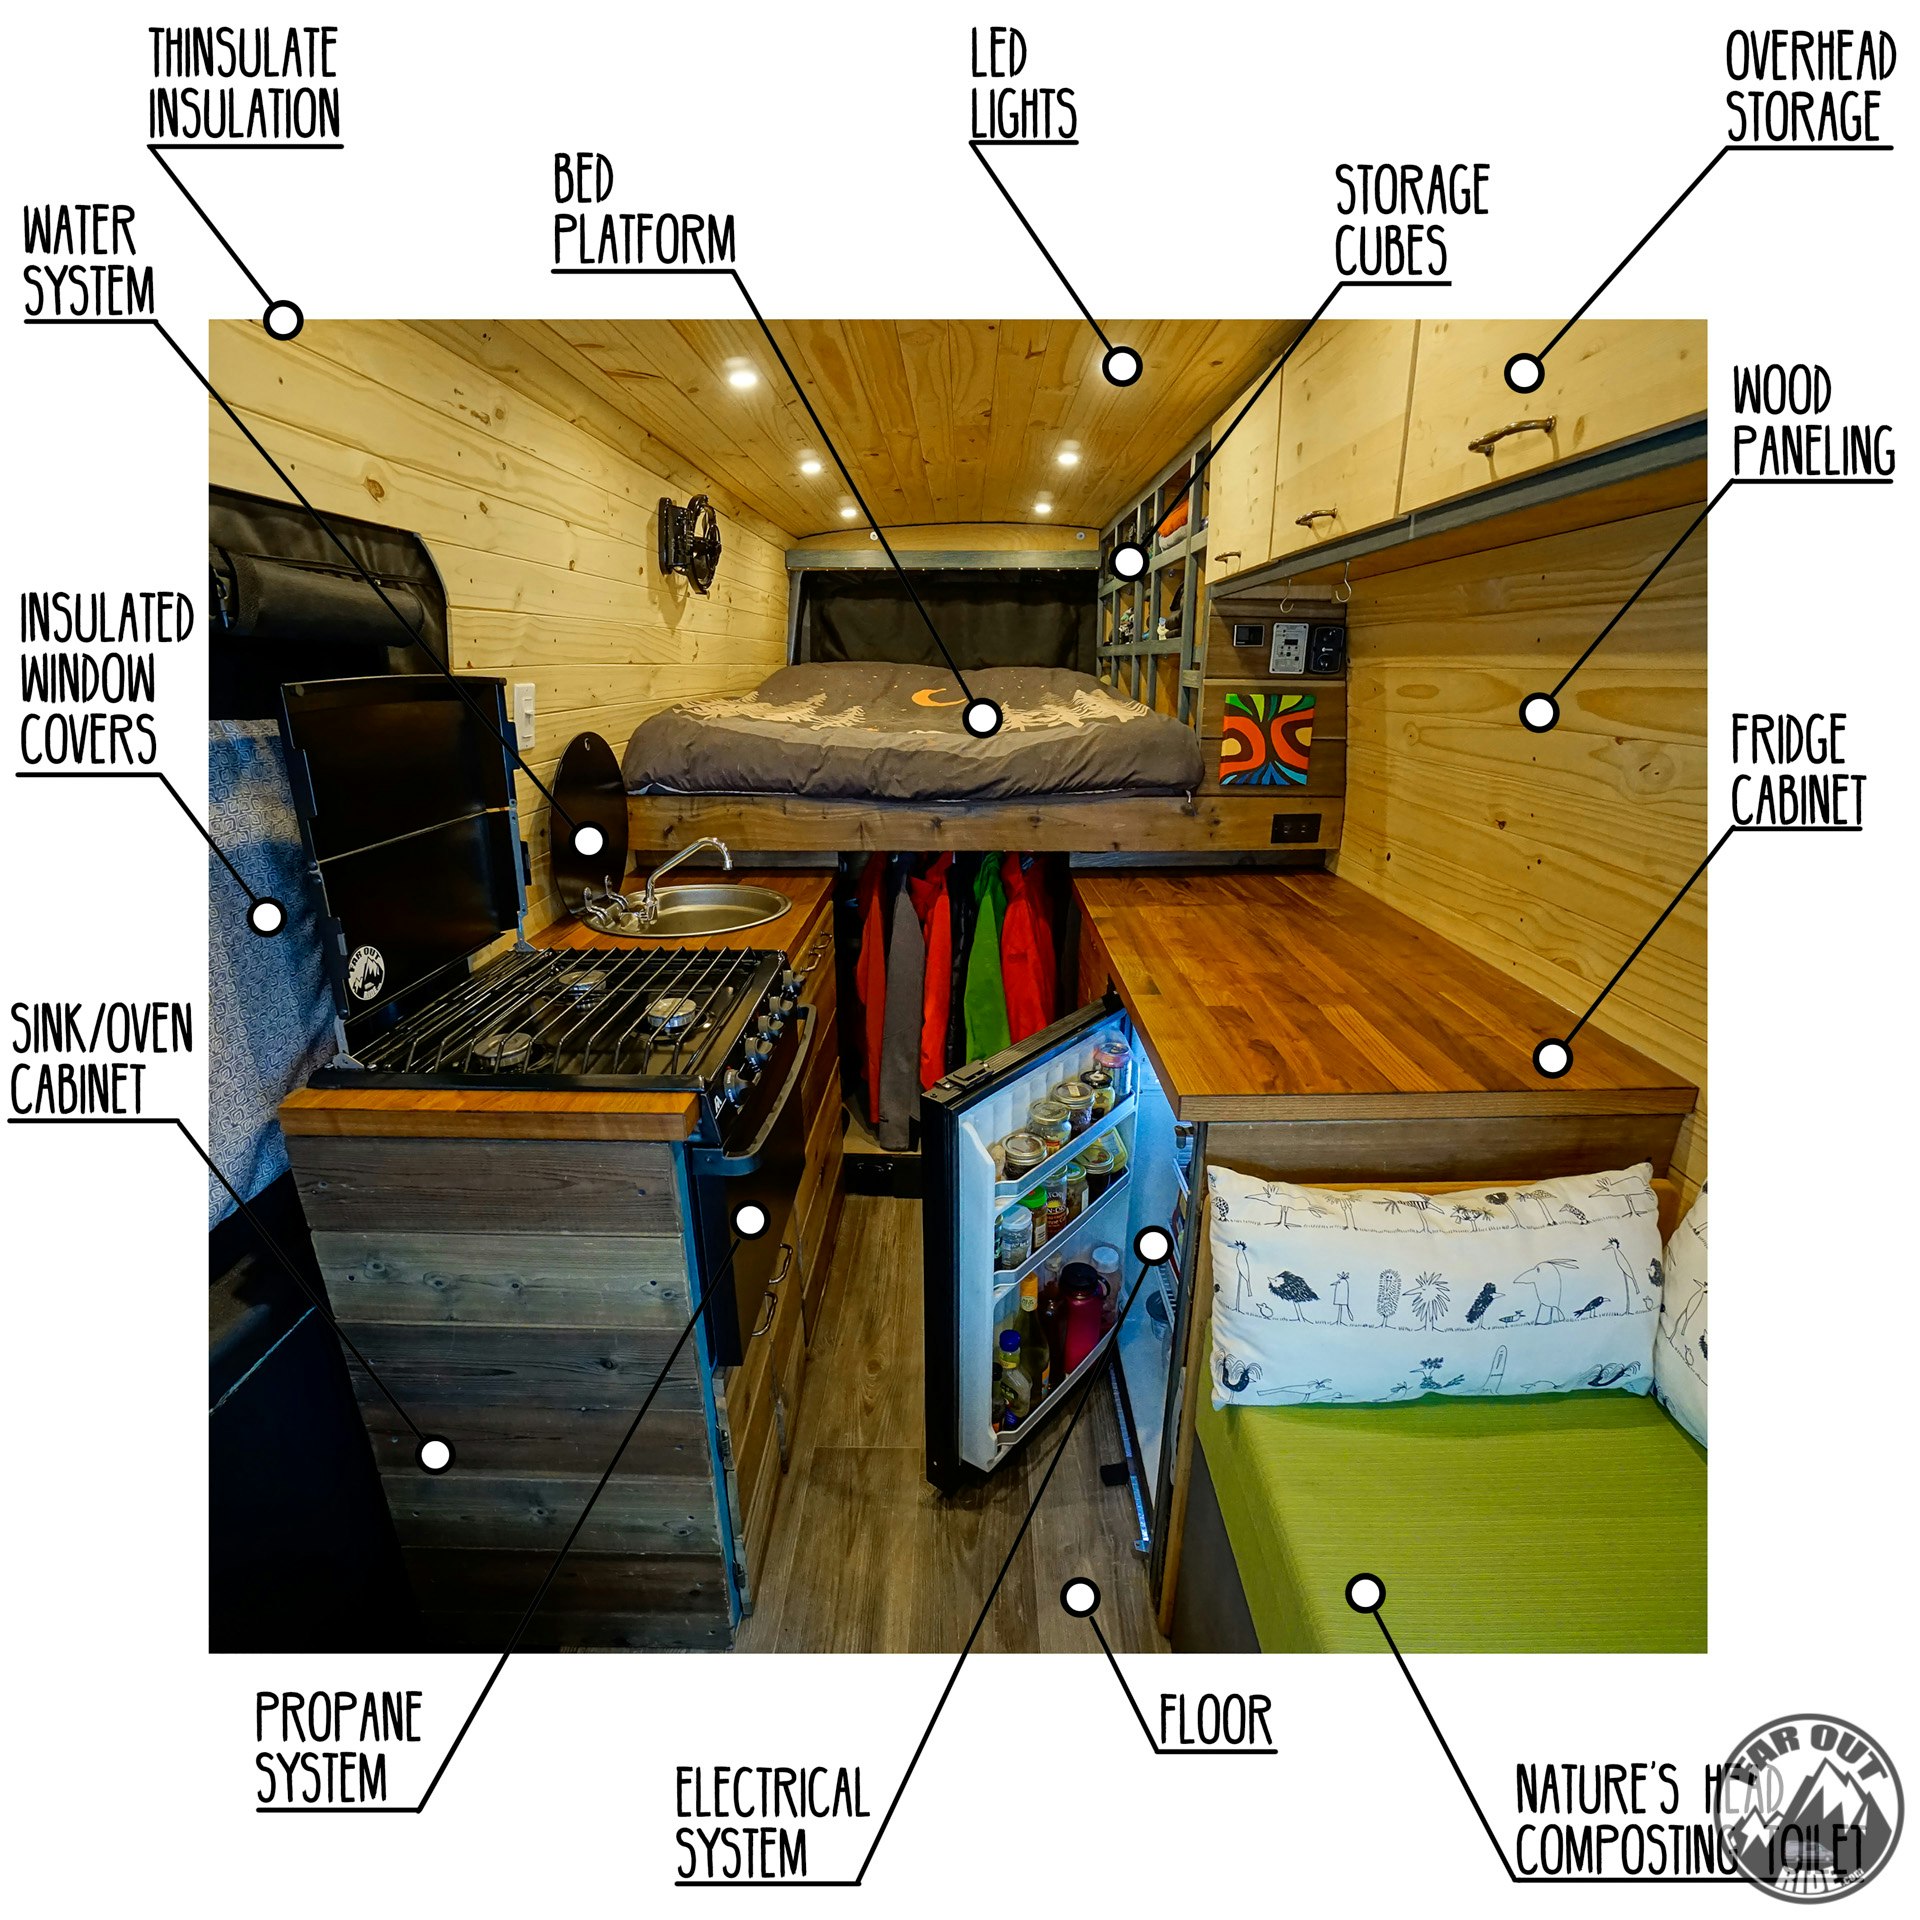 The completed layout of the van